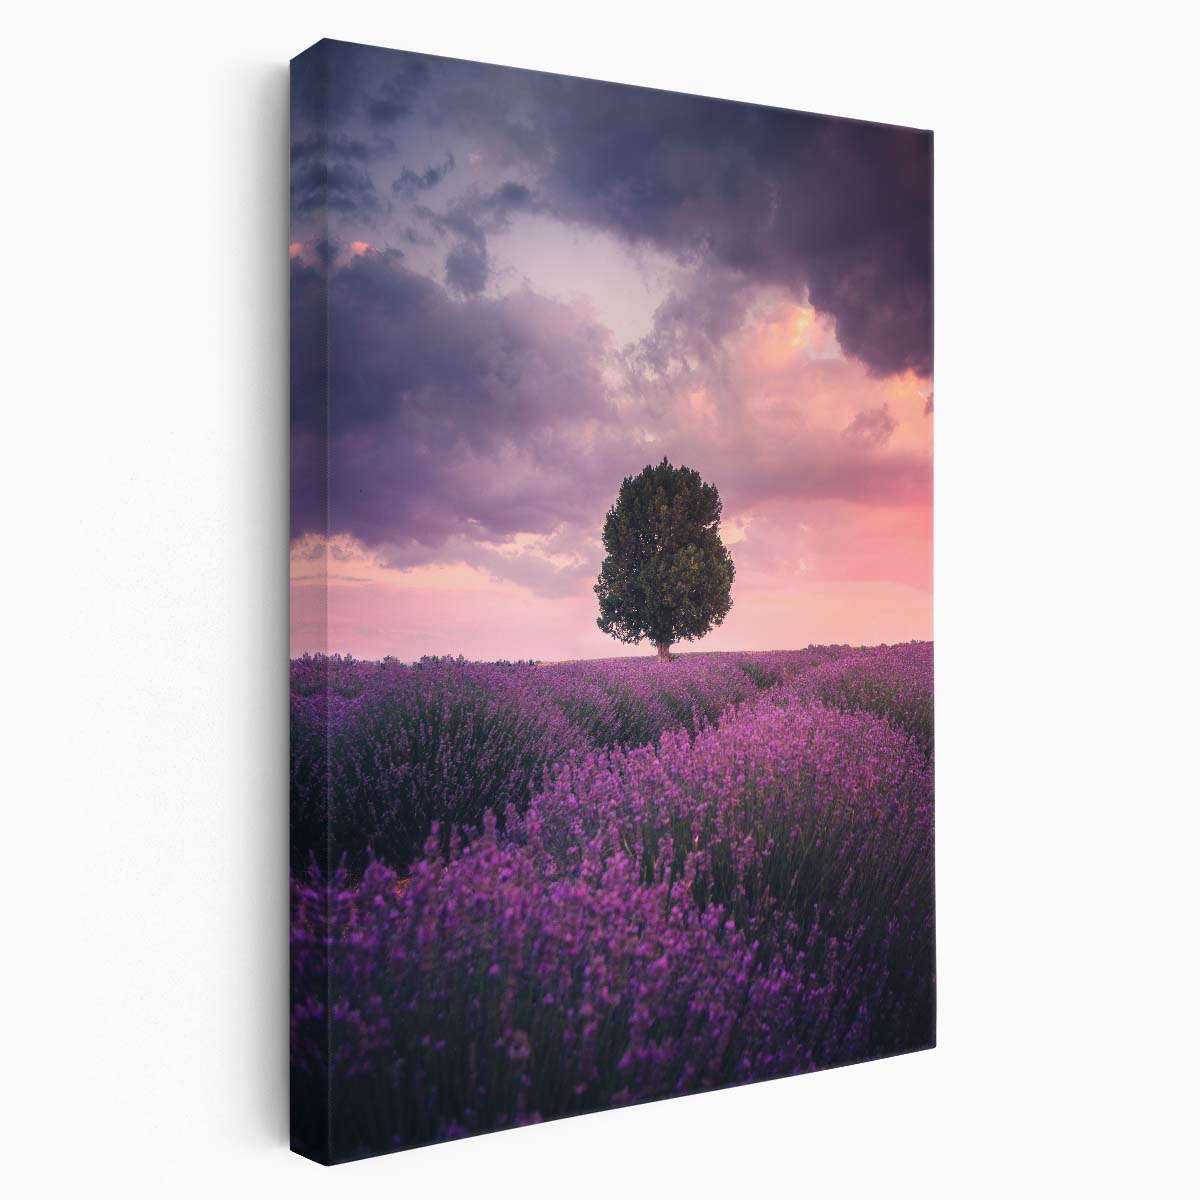 Isparta Lavender Fields Photography Pastel, Botanical Landscape Art by Luxuriance Designs, made in USA